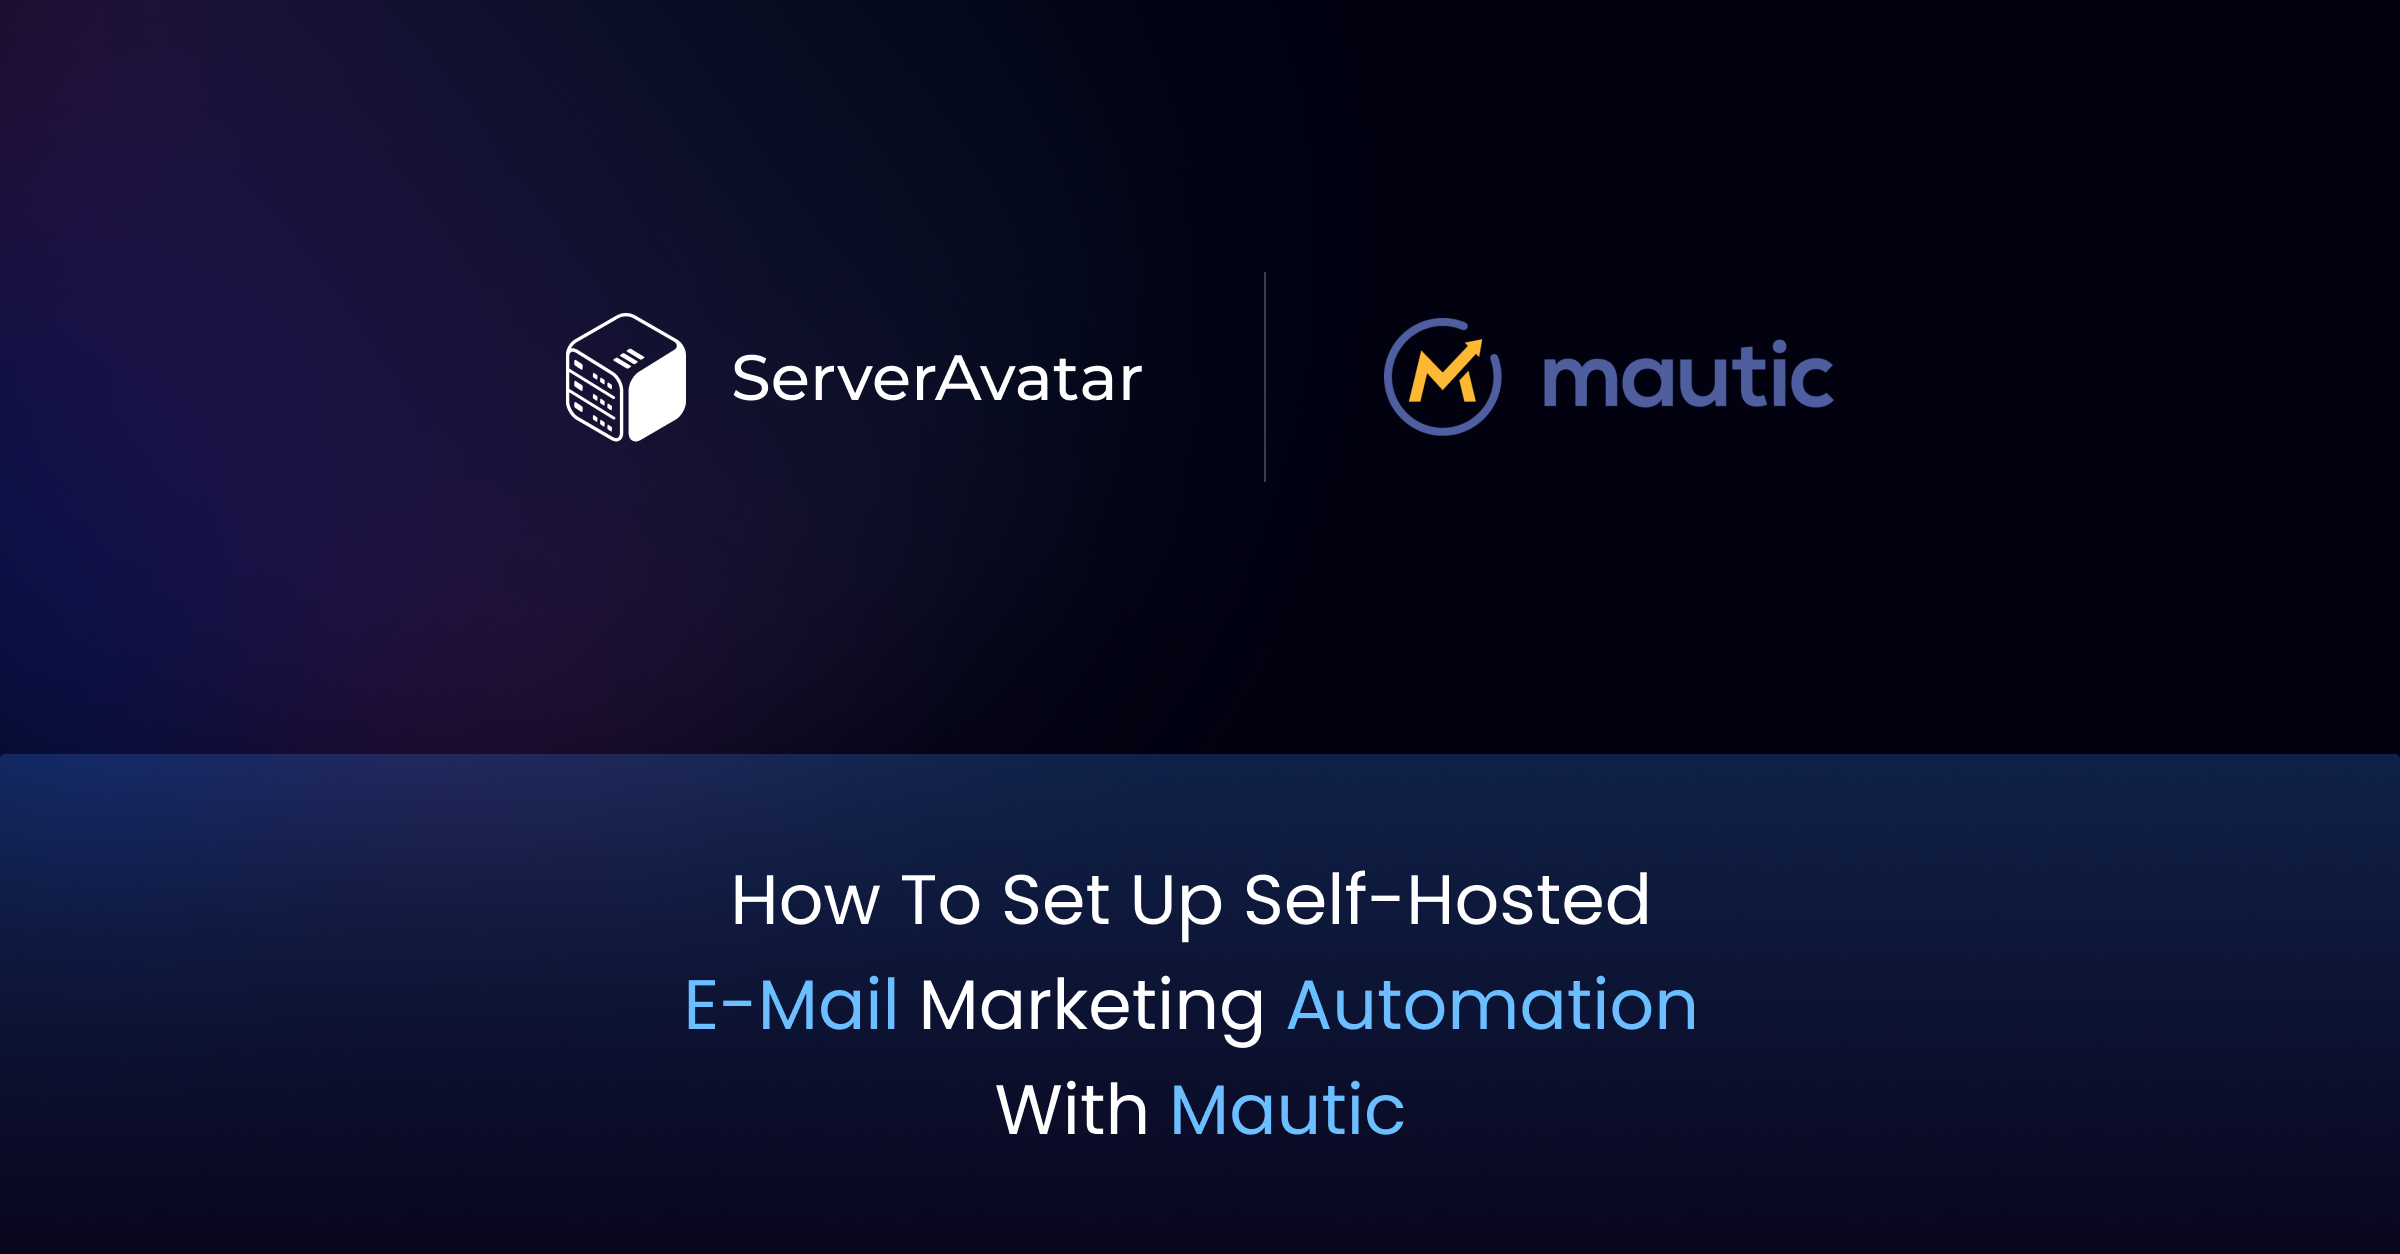 How to set up Self-Hosted E-mail Marketing Automation with Mautic